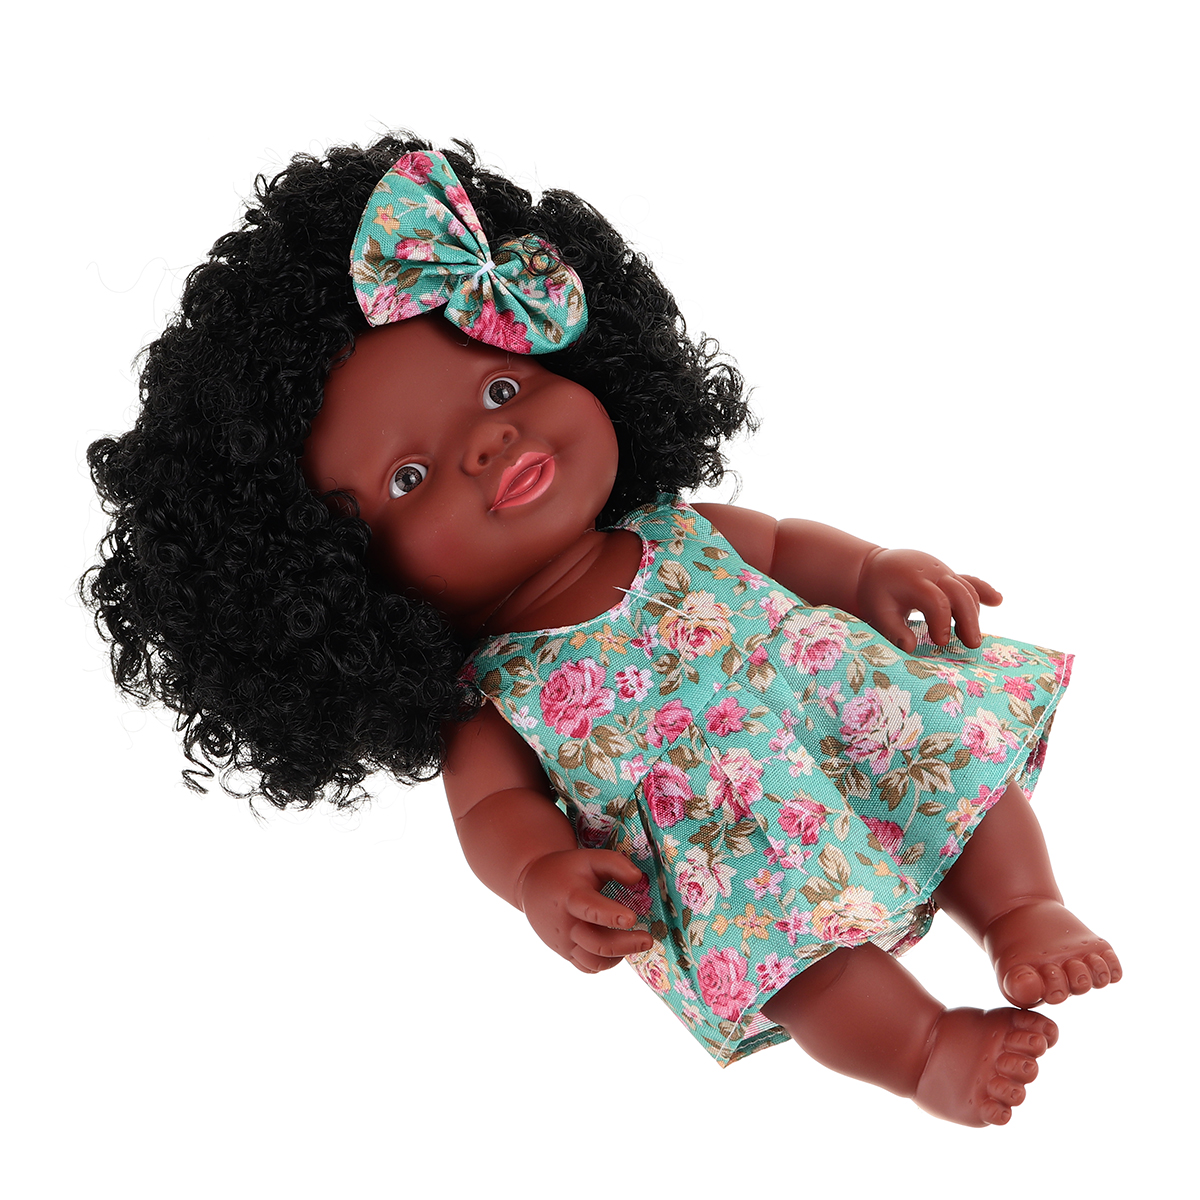 25CM-Cute-Soft-Silicone-Joint-Movable-Lifelike-Realistic-African-Black-Reborn-Baby-Doll-for-Kids-Gif-1733542-7